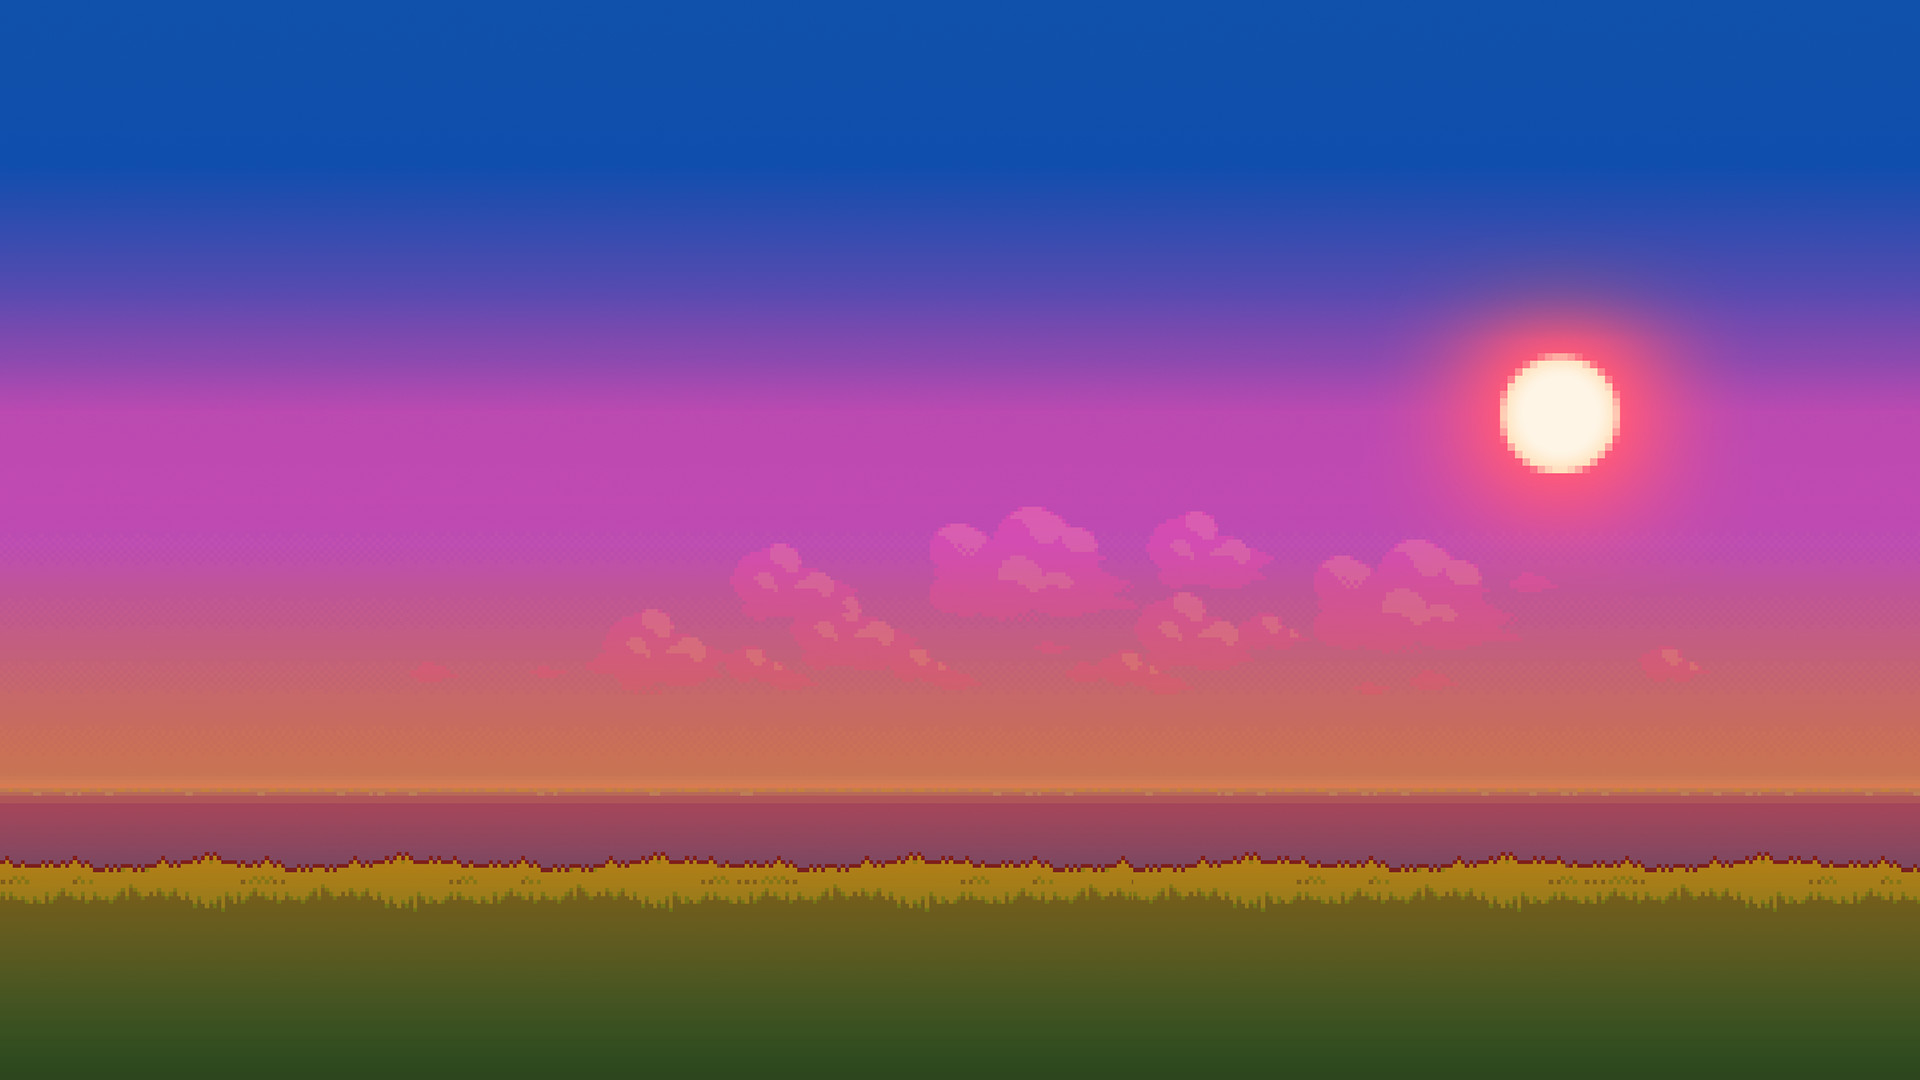 1920x1080 UPDATE: New version of the '8Bit Day' Wallpaper Set. Pixel wallpaper  changes based on time of day!